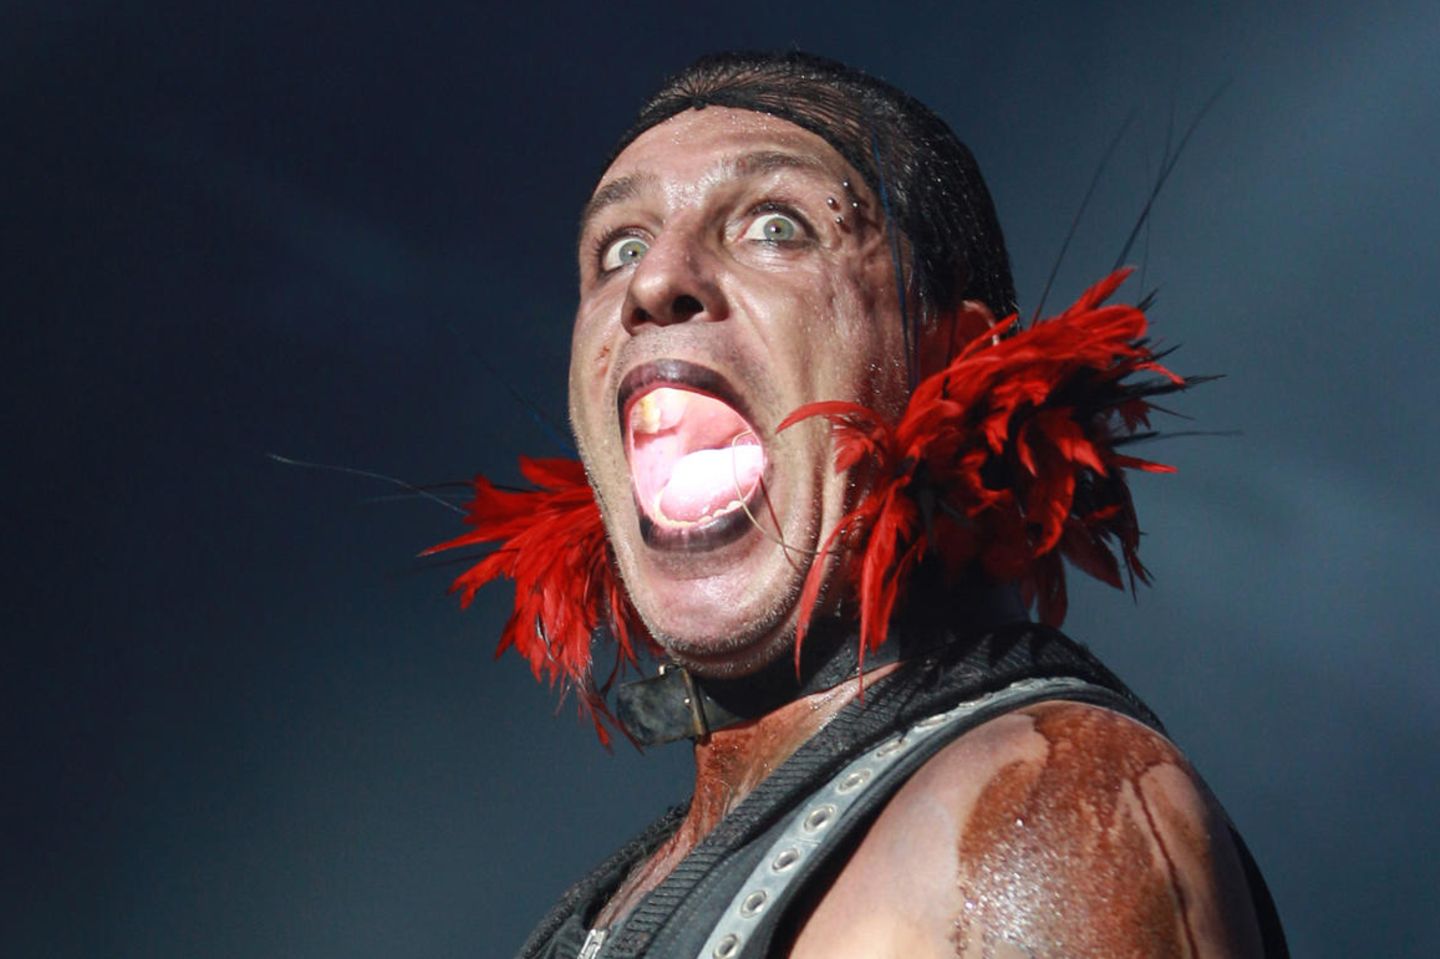 Till lindemann is a german musician, actor and poet. 